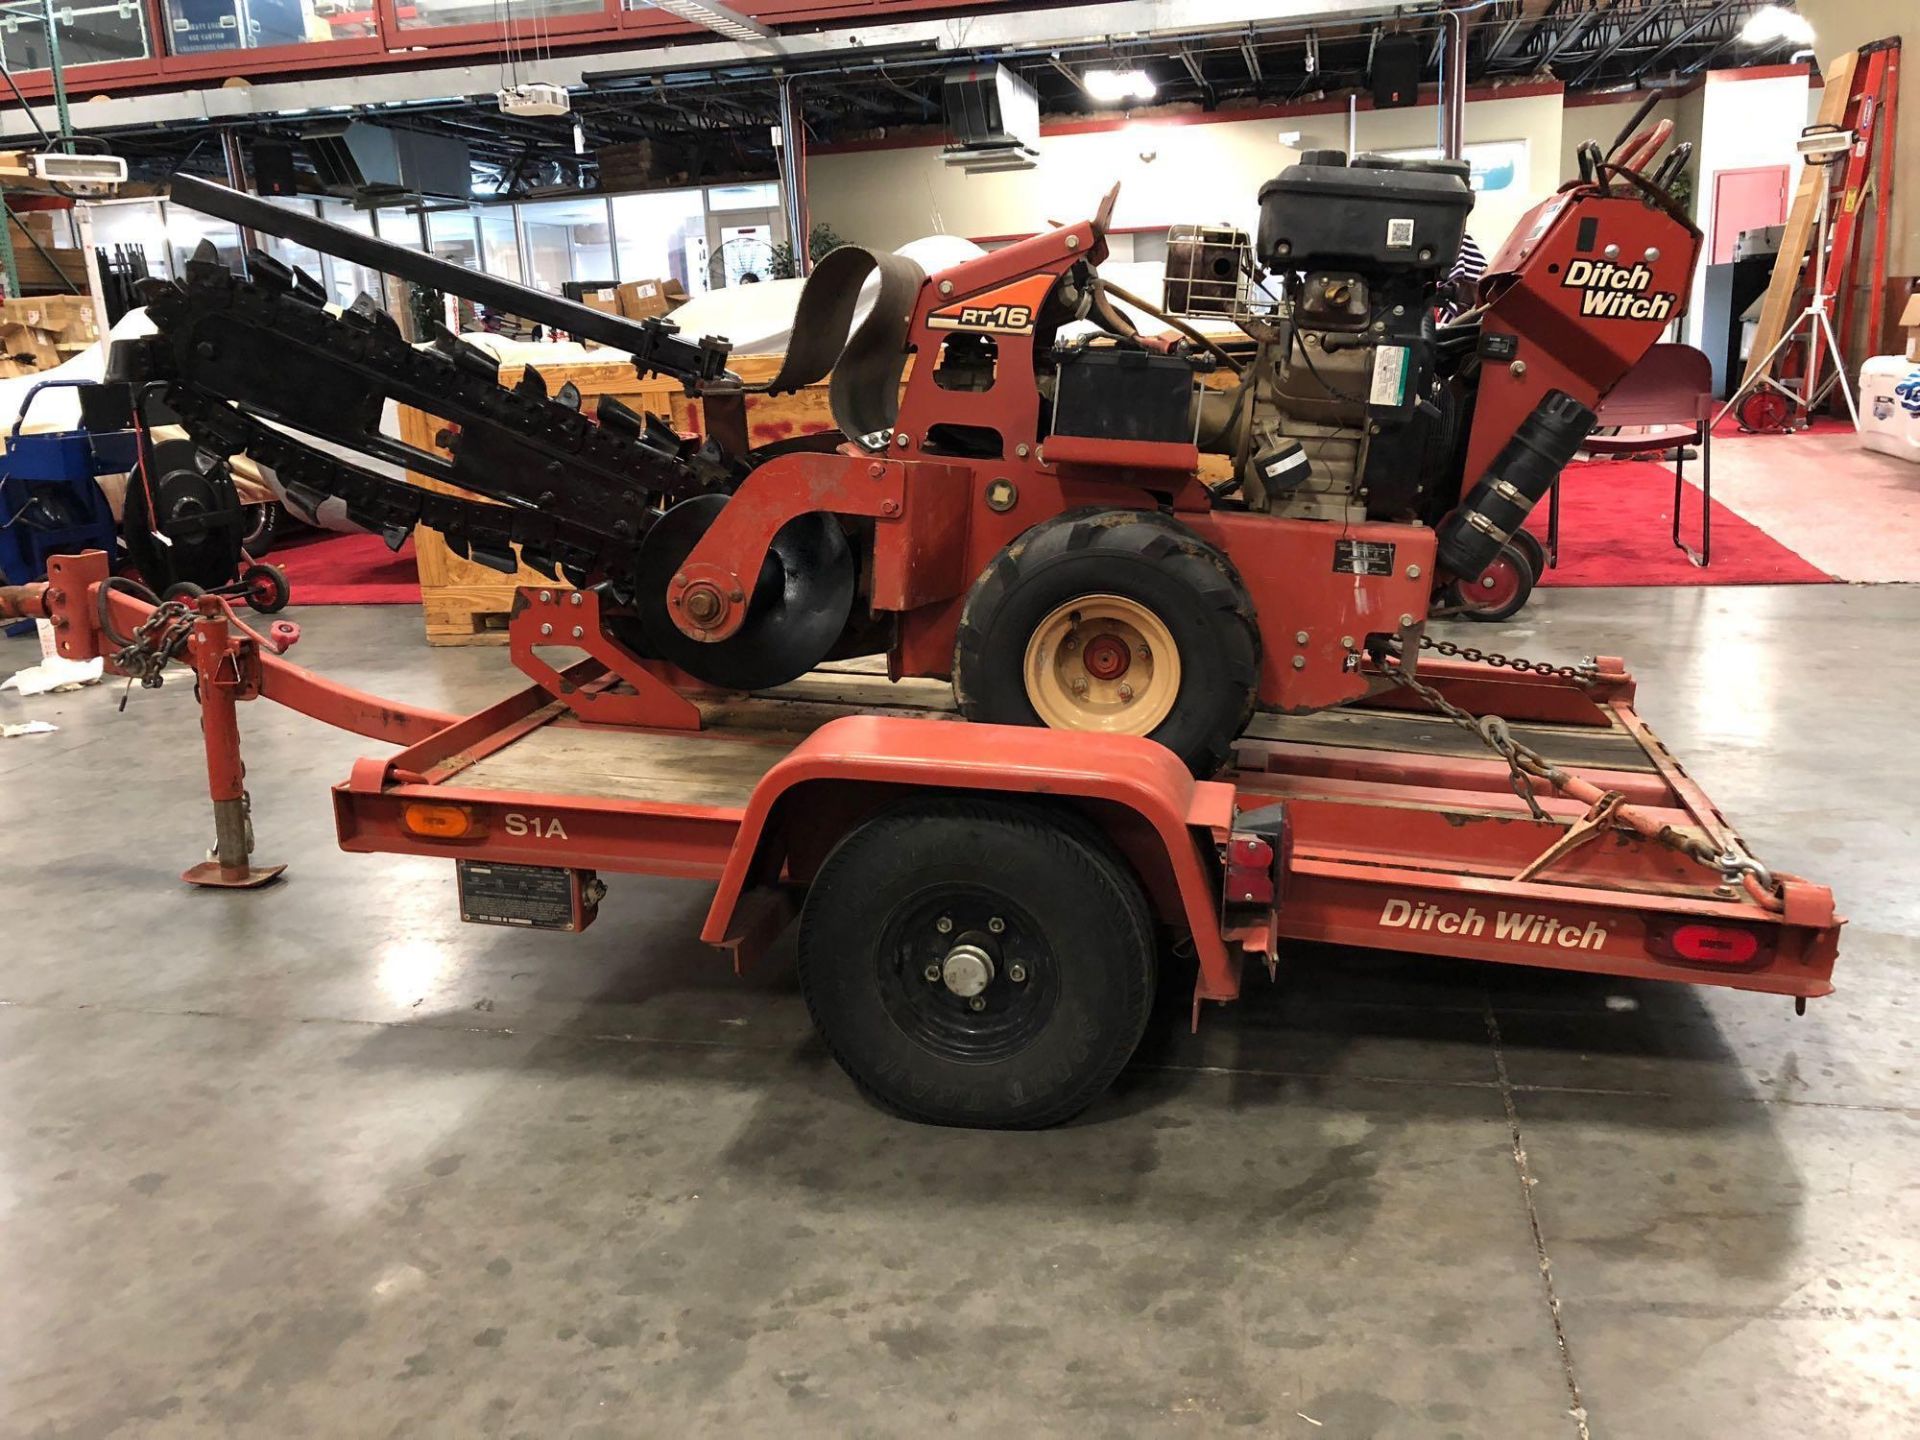 2012 DITCH WITCH RT16 WALK BEHIND TRENCHER W/ TRAILER, CARBIDE TEETH, 99.3 HOURS SHOWING - Image 2 of 10